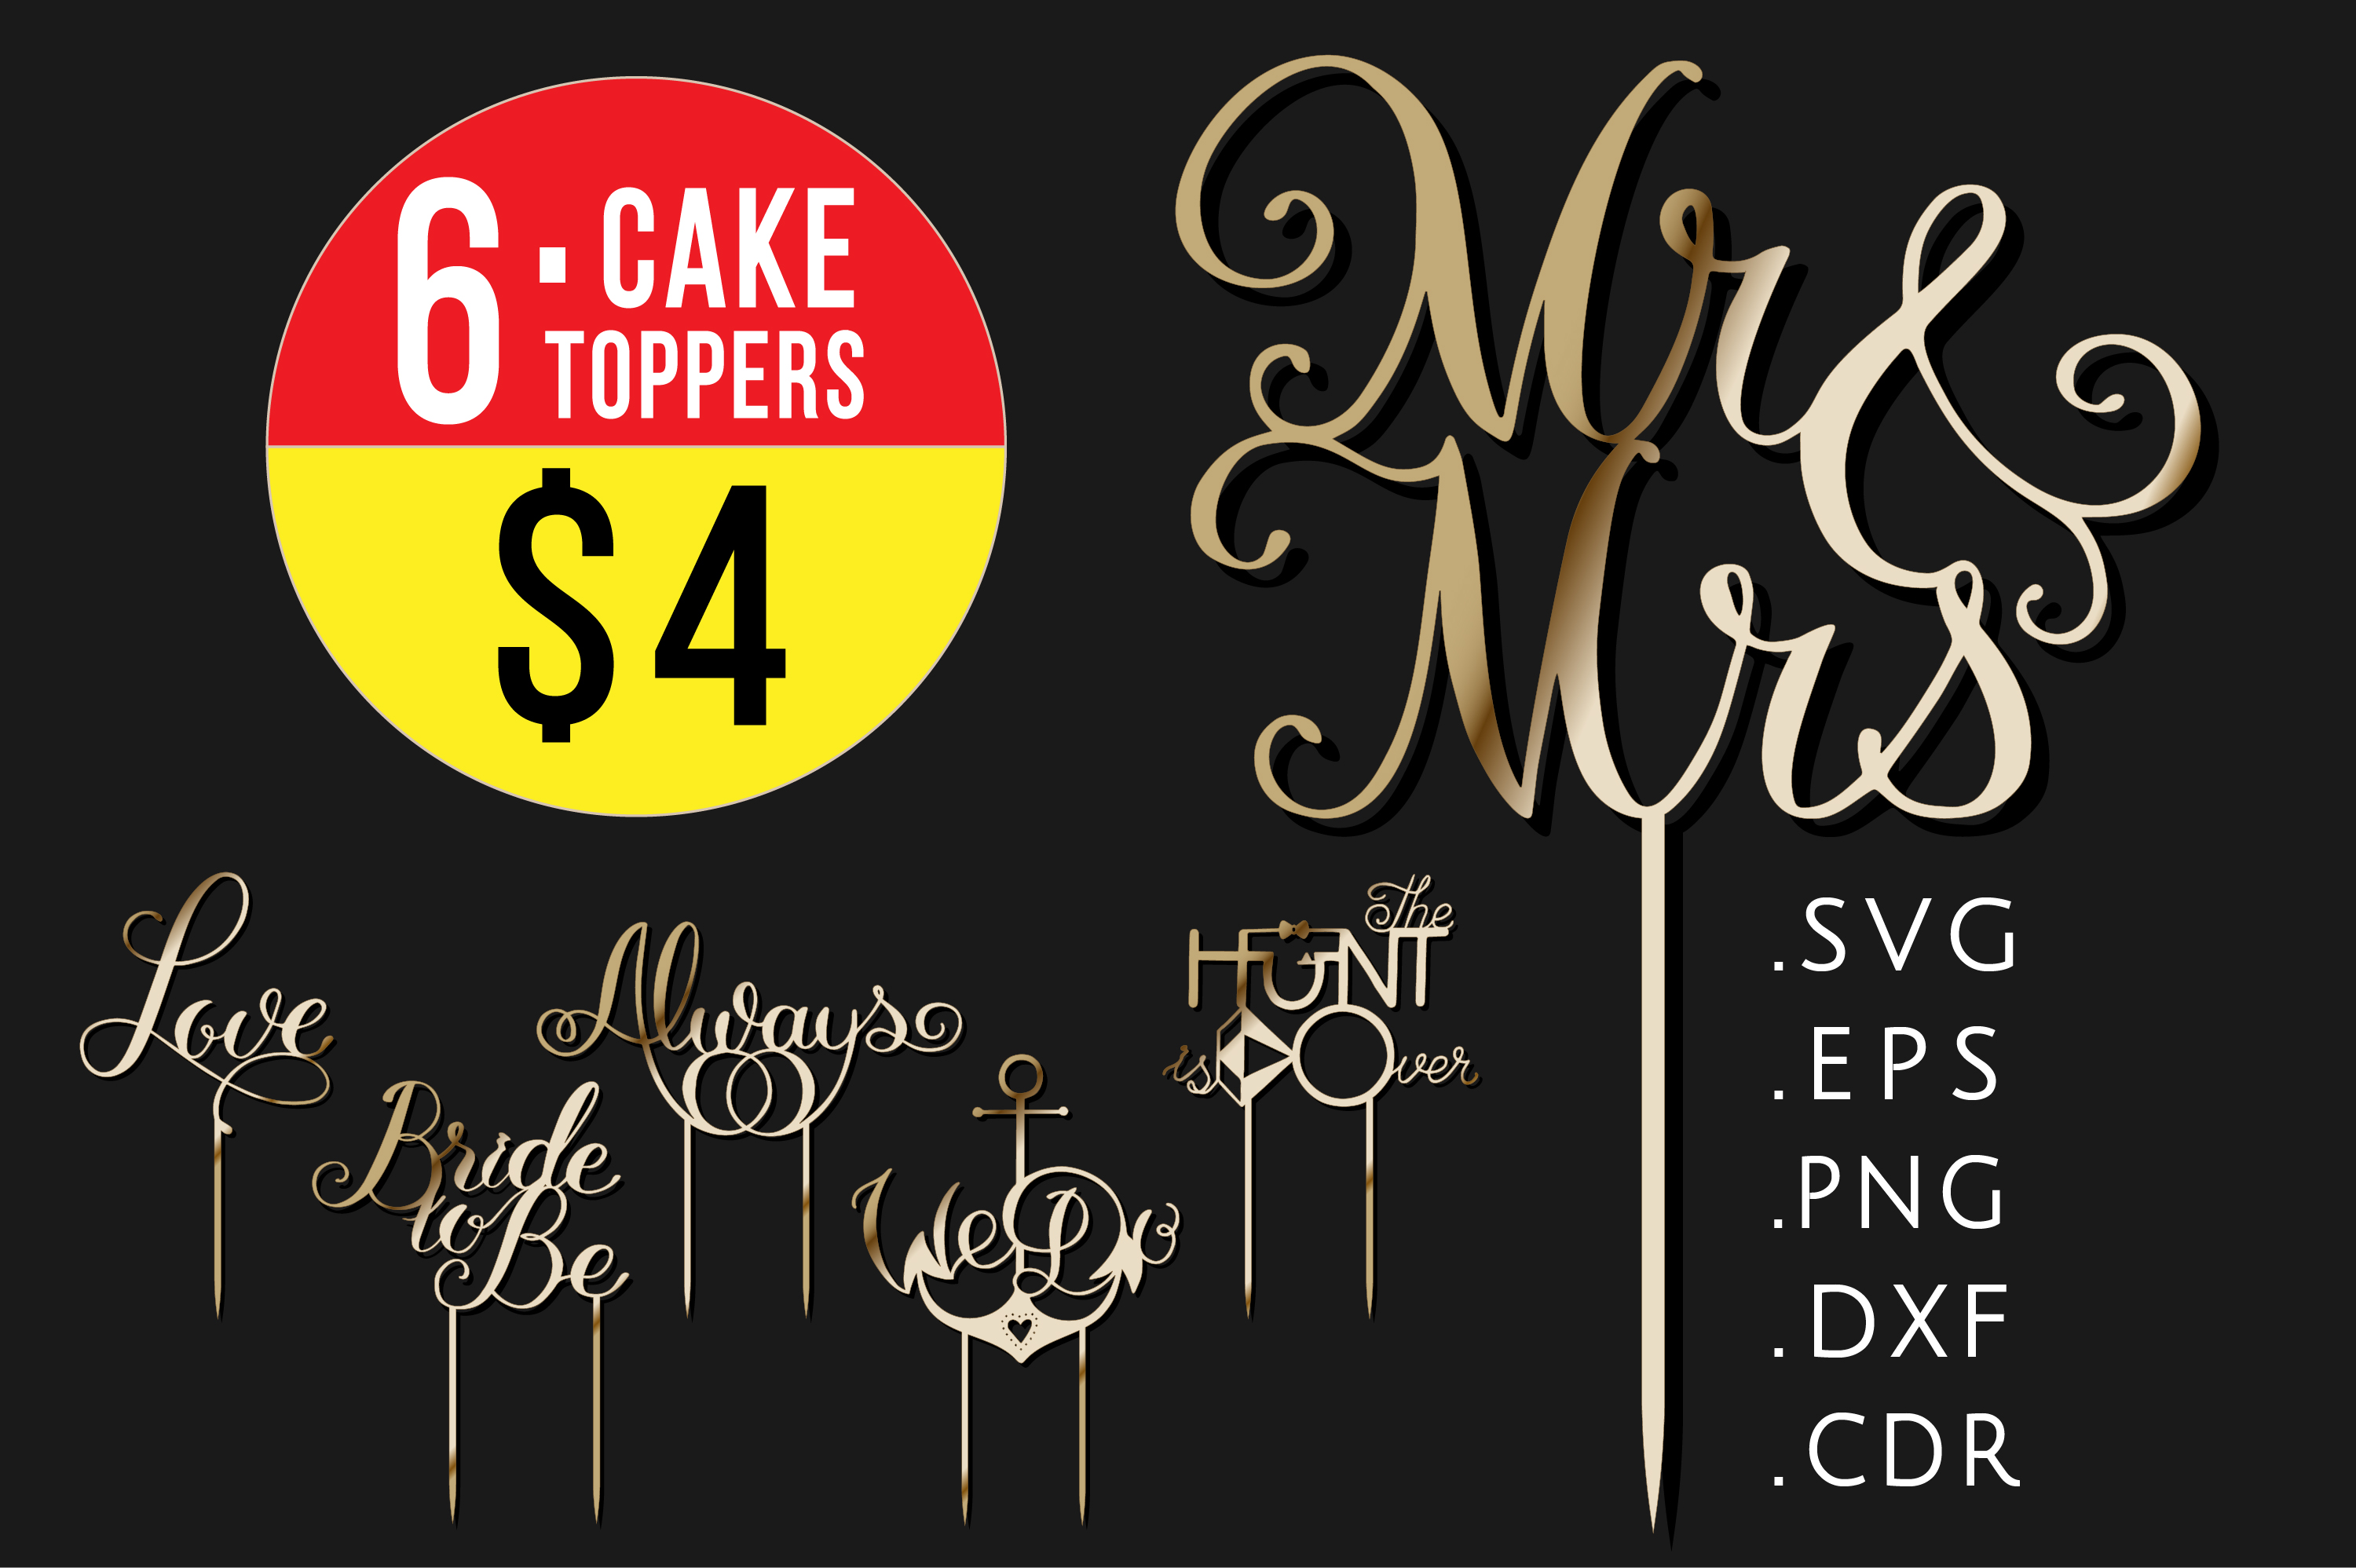 6 Wedding Cake toppers, SVG templates, Mr and Mrs party sign